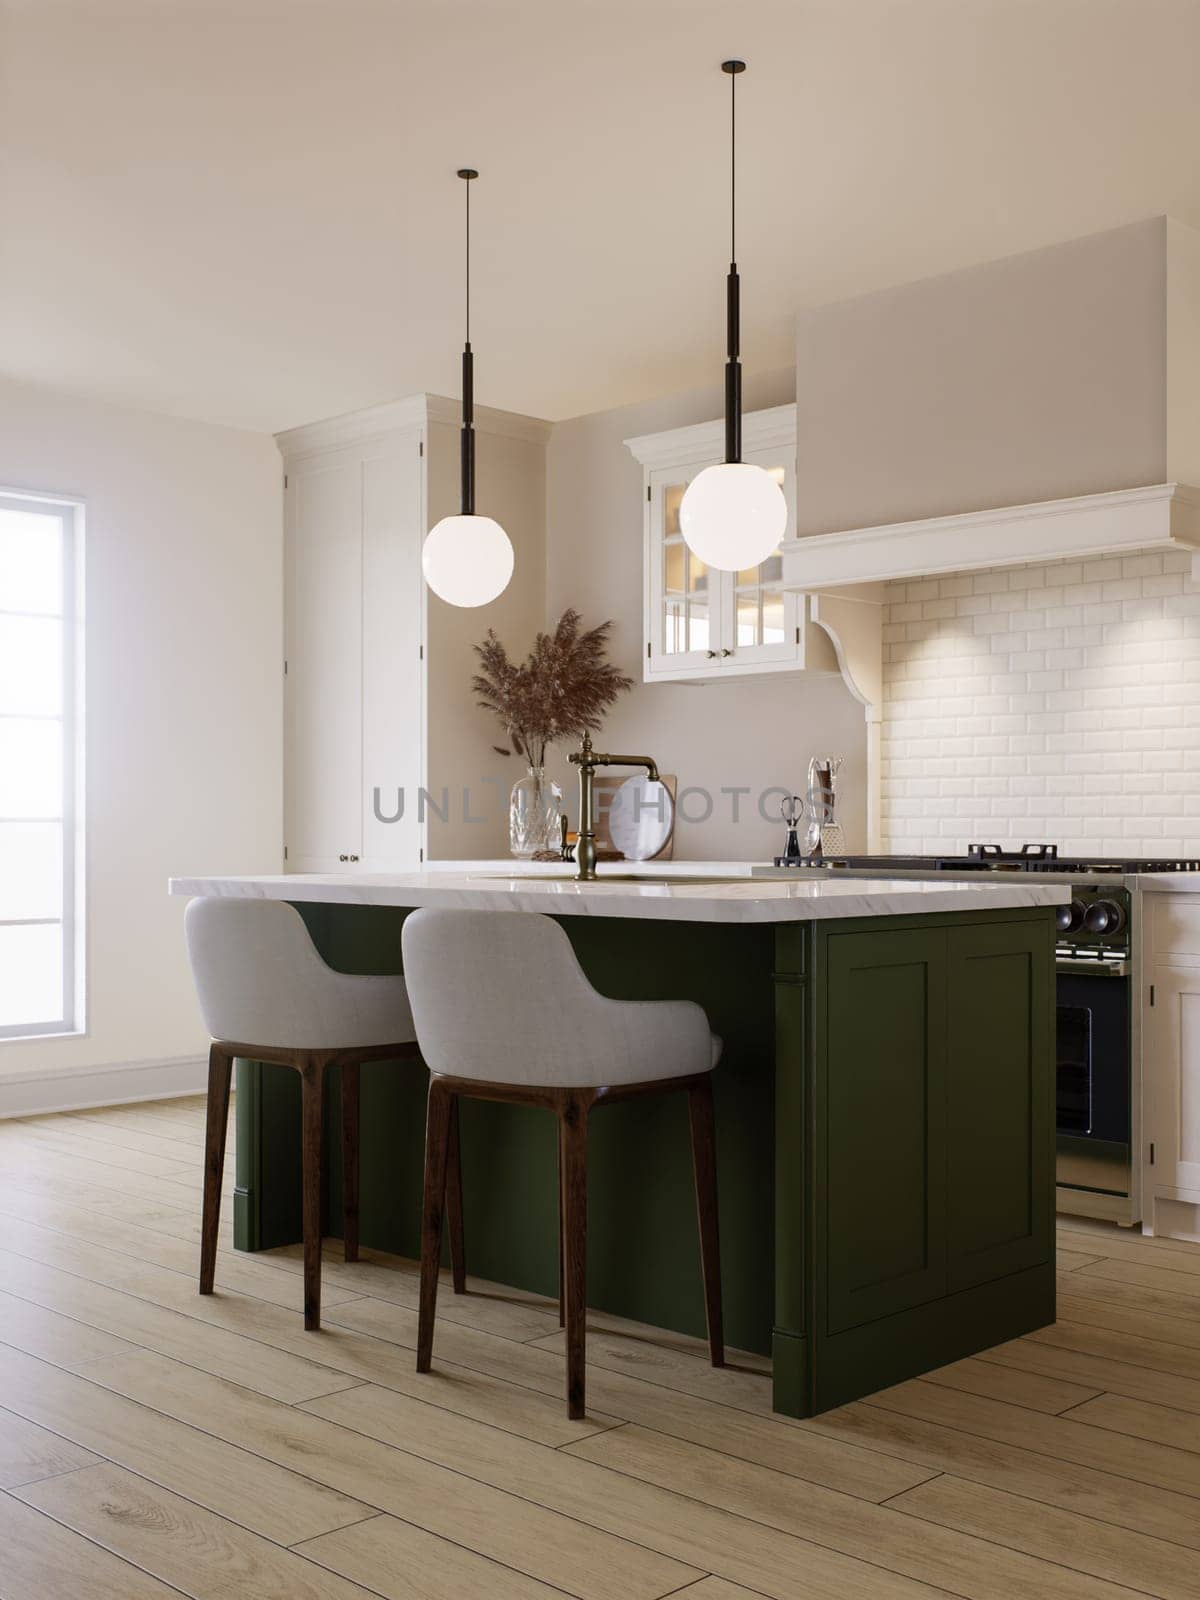 Bright kitchen in warm colors with a green island. by N_Design